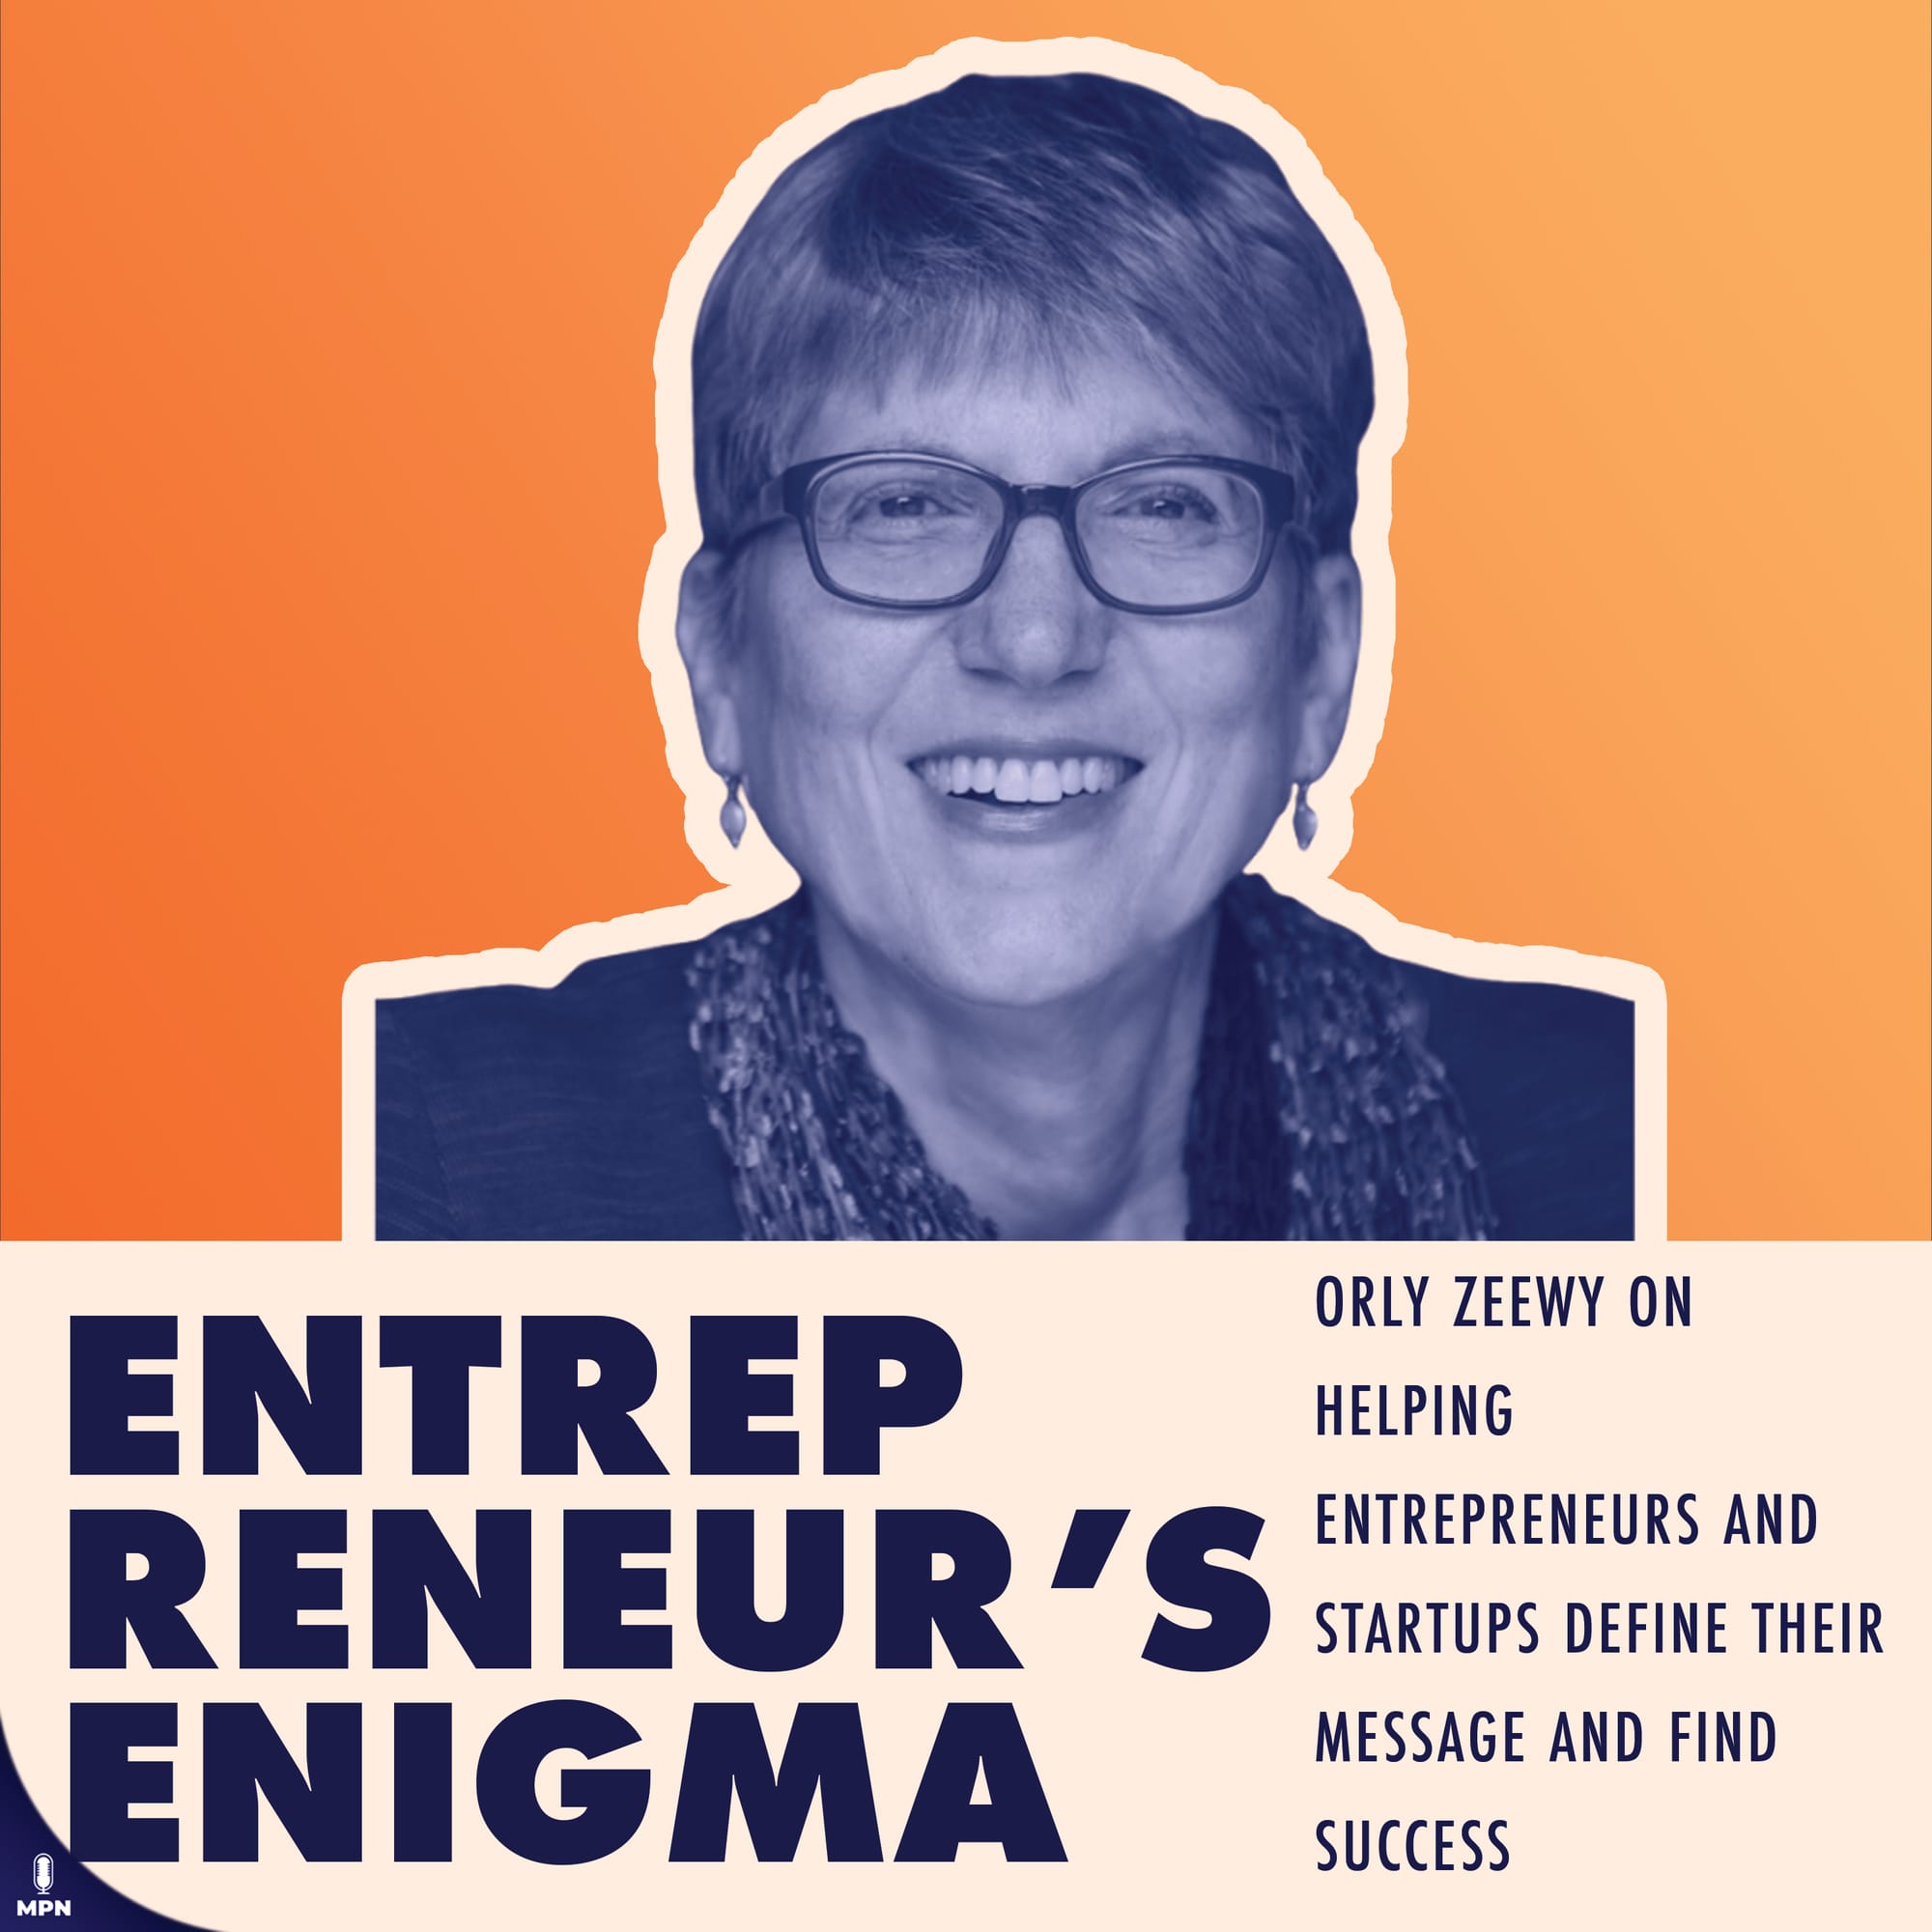 Entrepreneur's Enigma album art says Orly Zeewy on helping entrepreneurs and startups define their message and find success